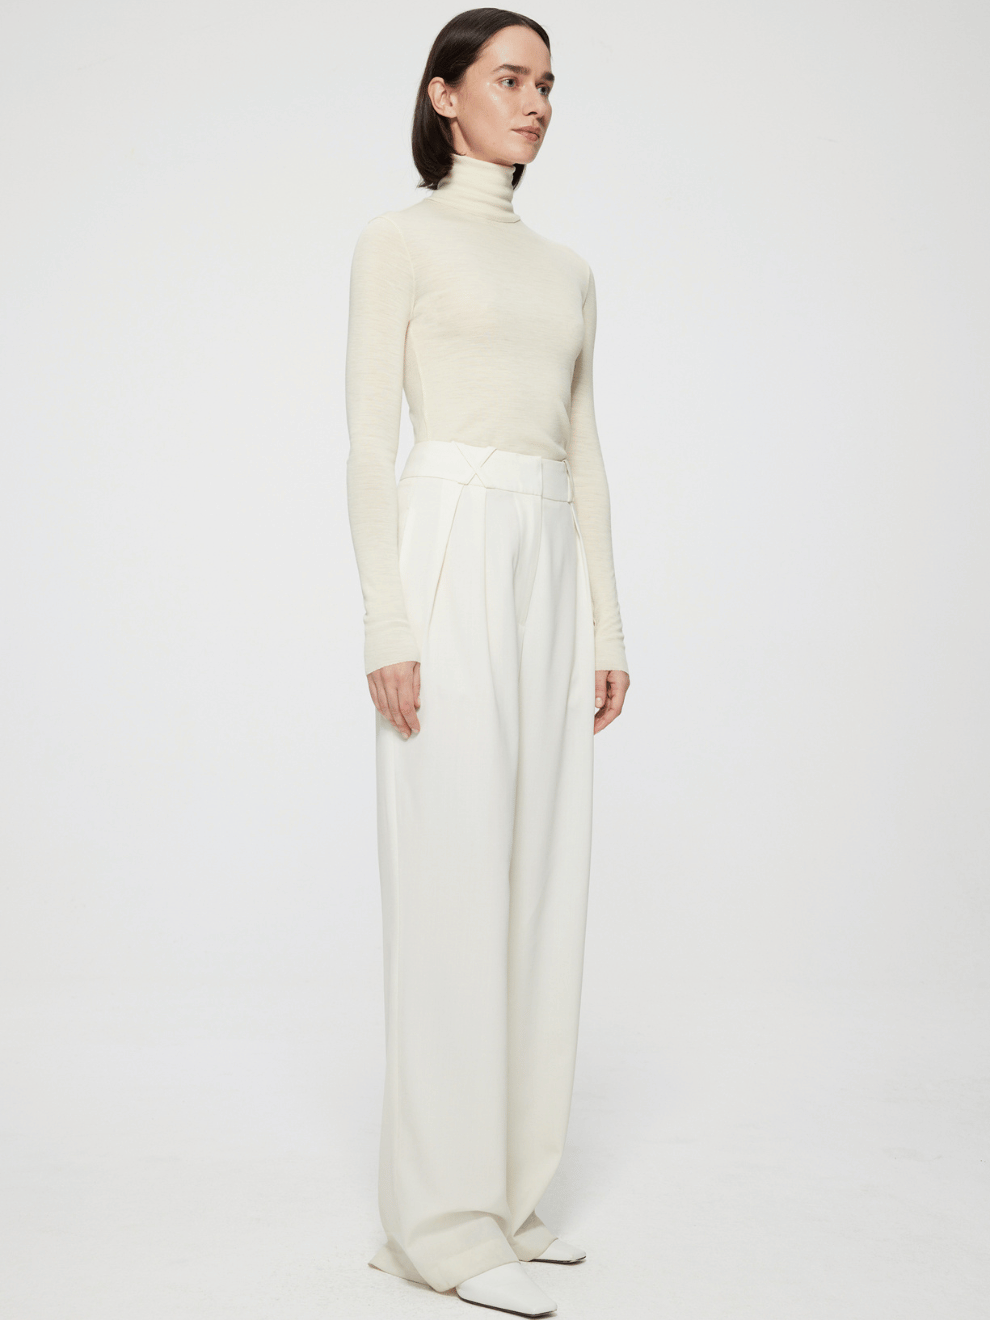 Wide Leg Tailored Trousers in Cream